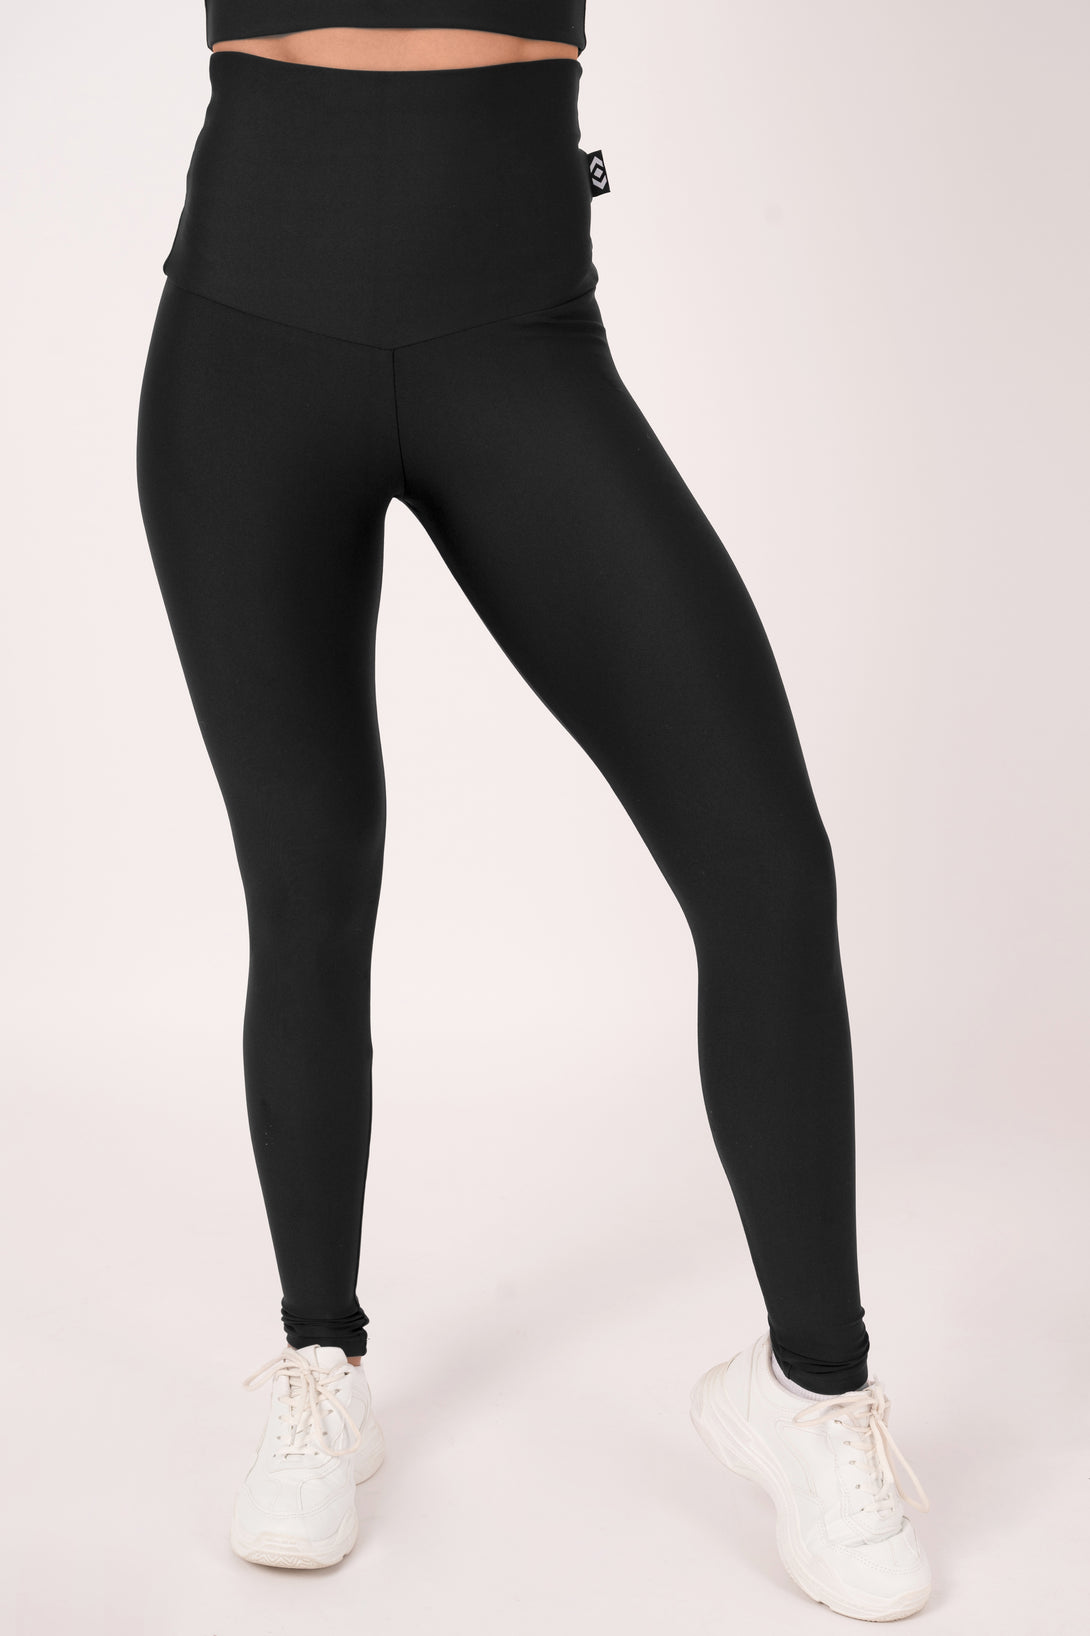 West Loop High Waist Leggings Black Size L - $13 New With Tags - From  Sellani